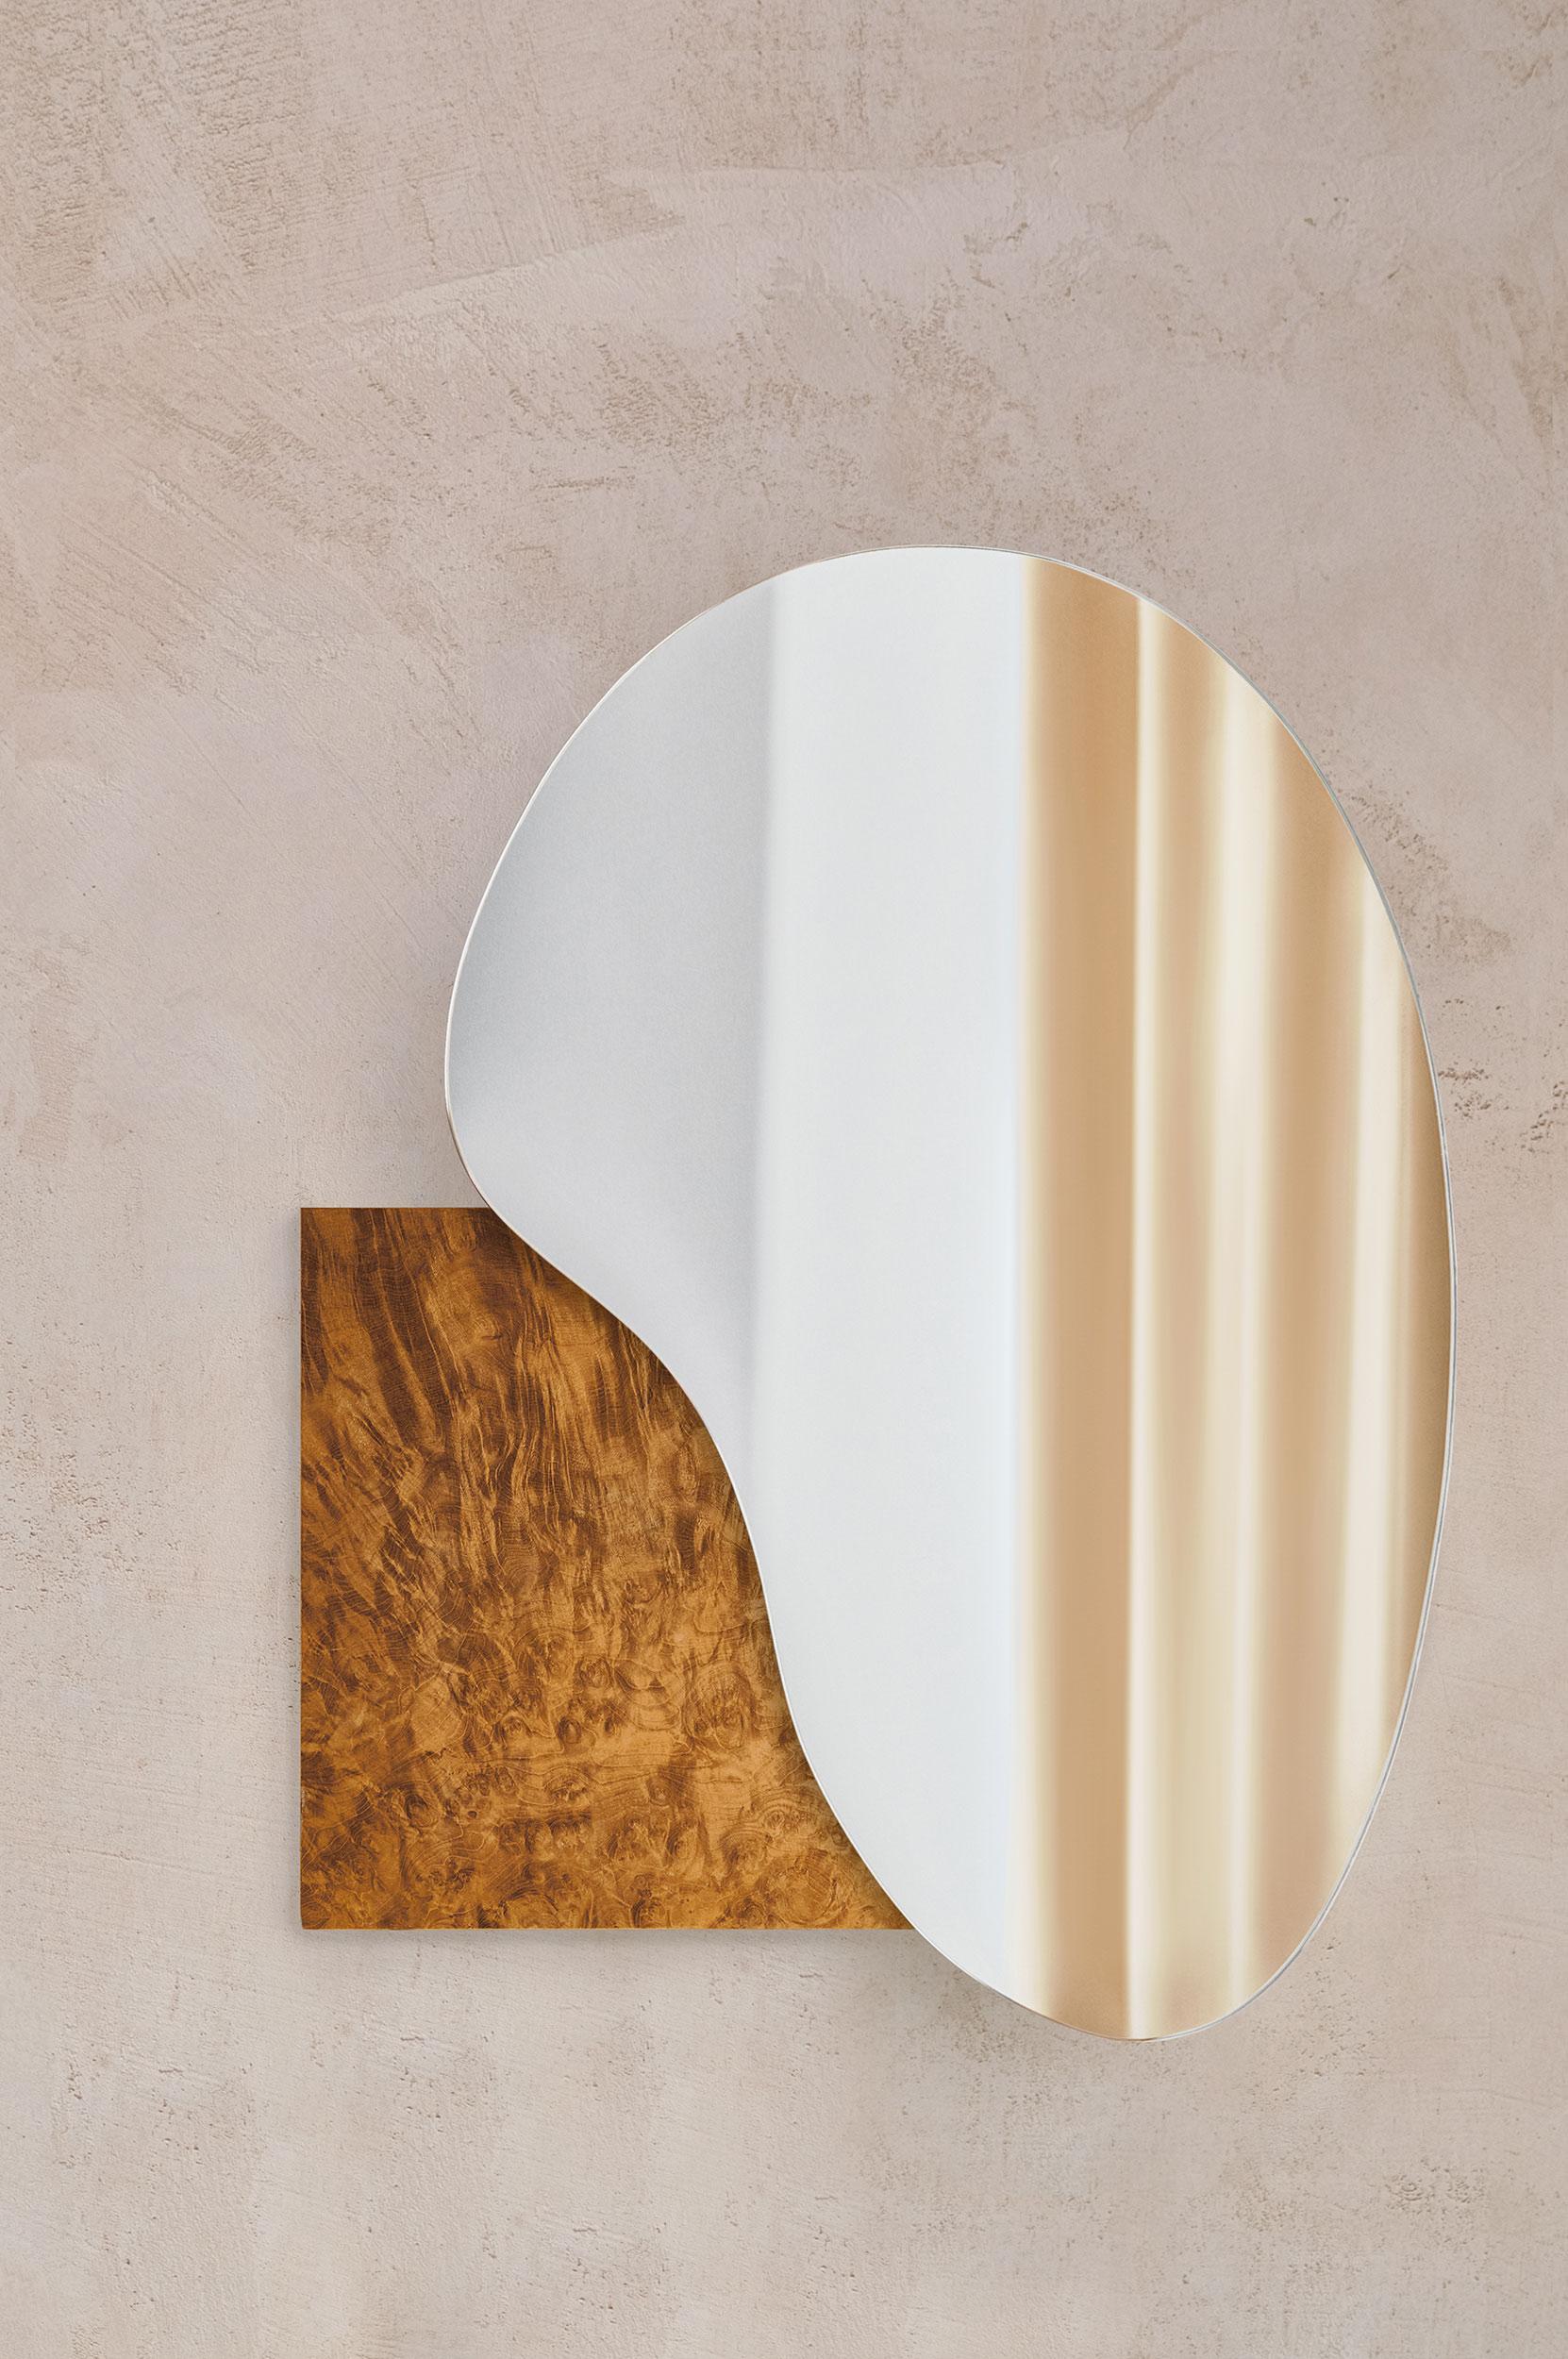 Lake 4 Madrone Mirror
Brand: NOOM
Designers: Maryna Dague & Nathan Baraness

Type of Mirrors: Optiwhite, Black tint mirror, Copper tint mirror
Materials for base: Veneered wood, Madrona wood veneer, Burned steel, Stainless steel / Hand brushed